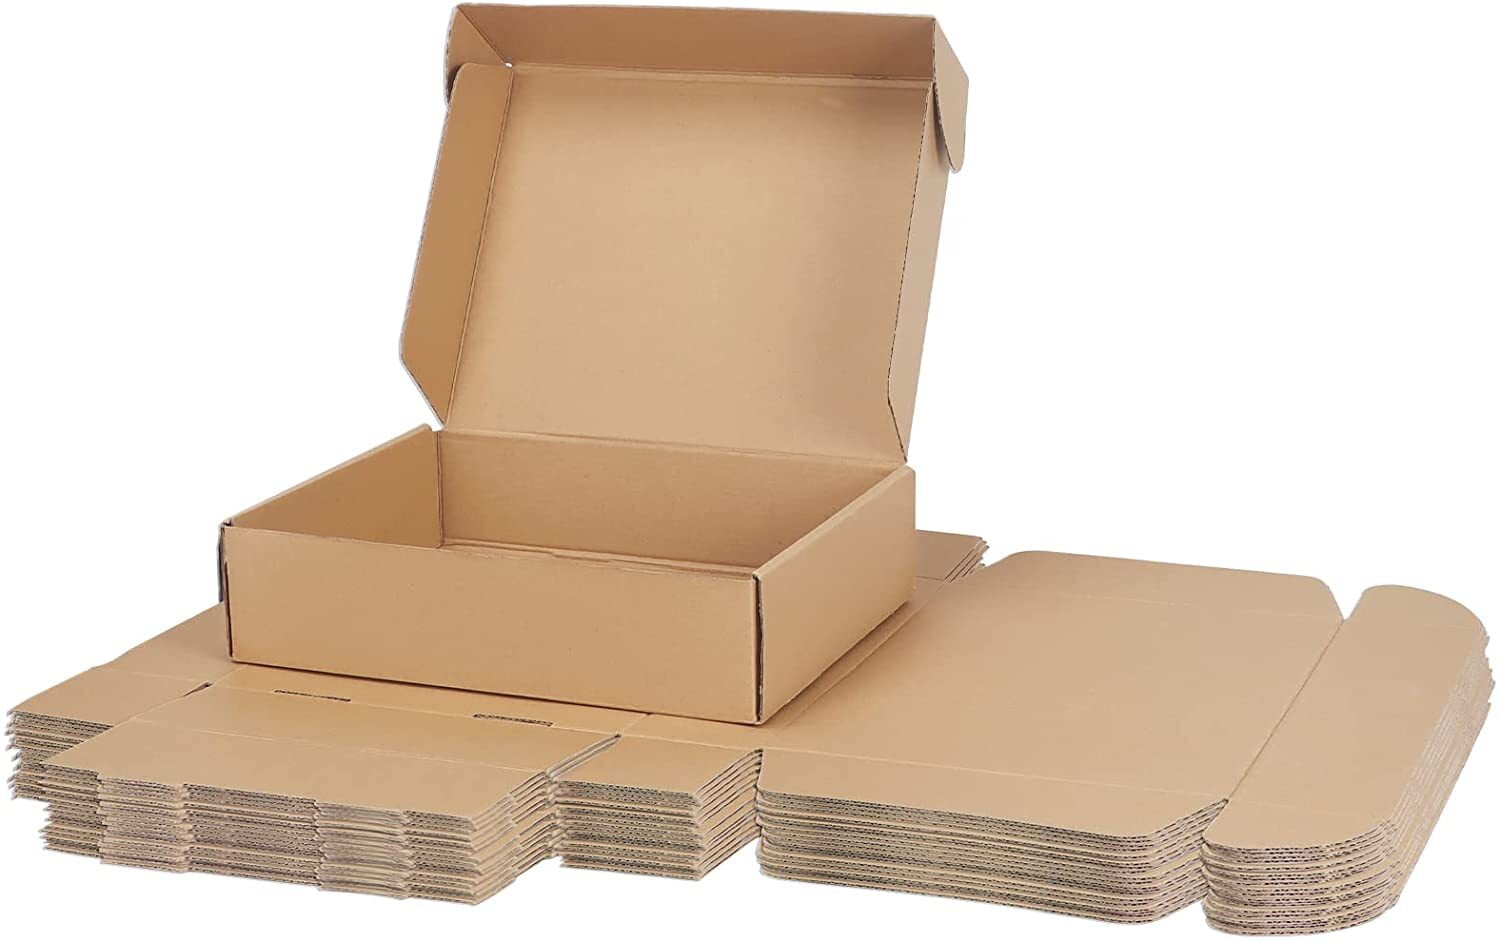 50 x SIZE 8x6x6" S/W MAILING POSTAL CARBOARD BOXES PACKING CARTONS *FAST* 